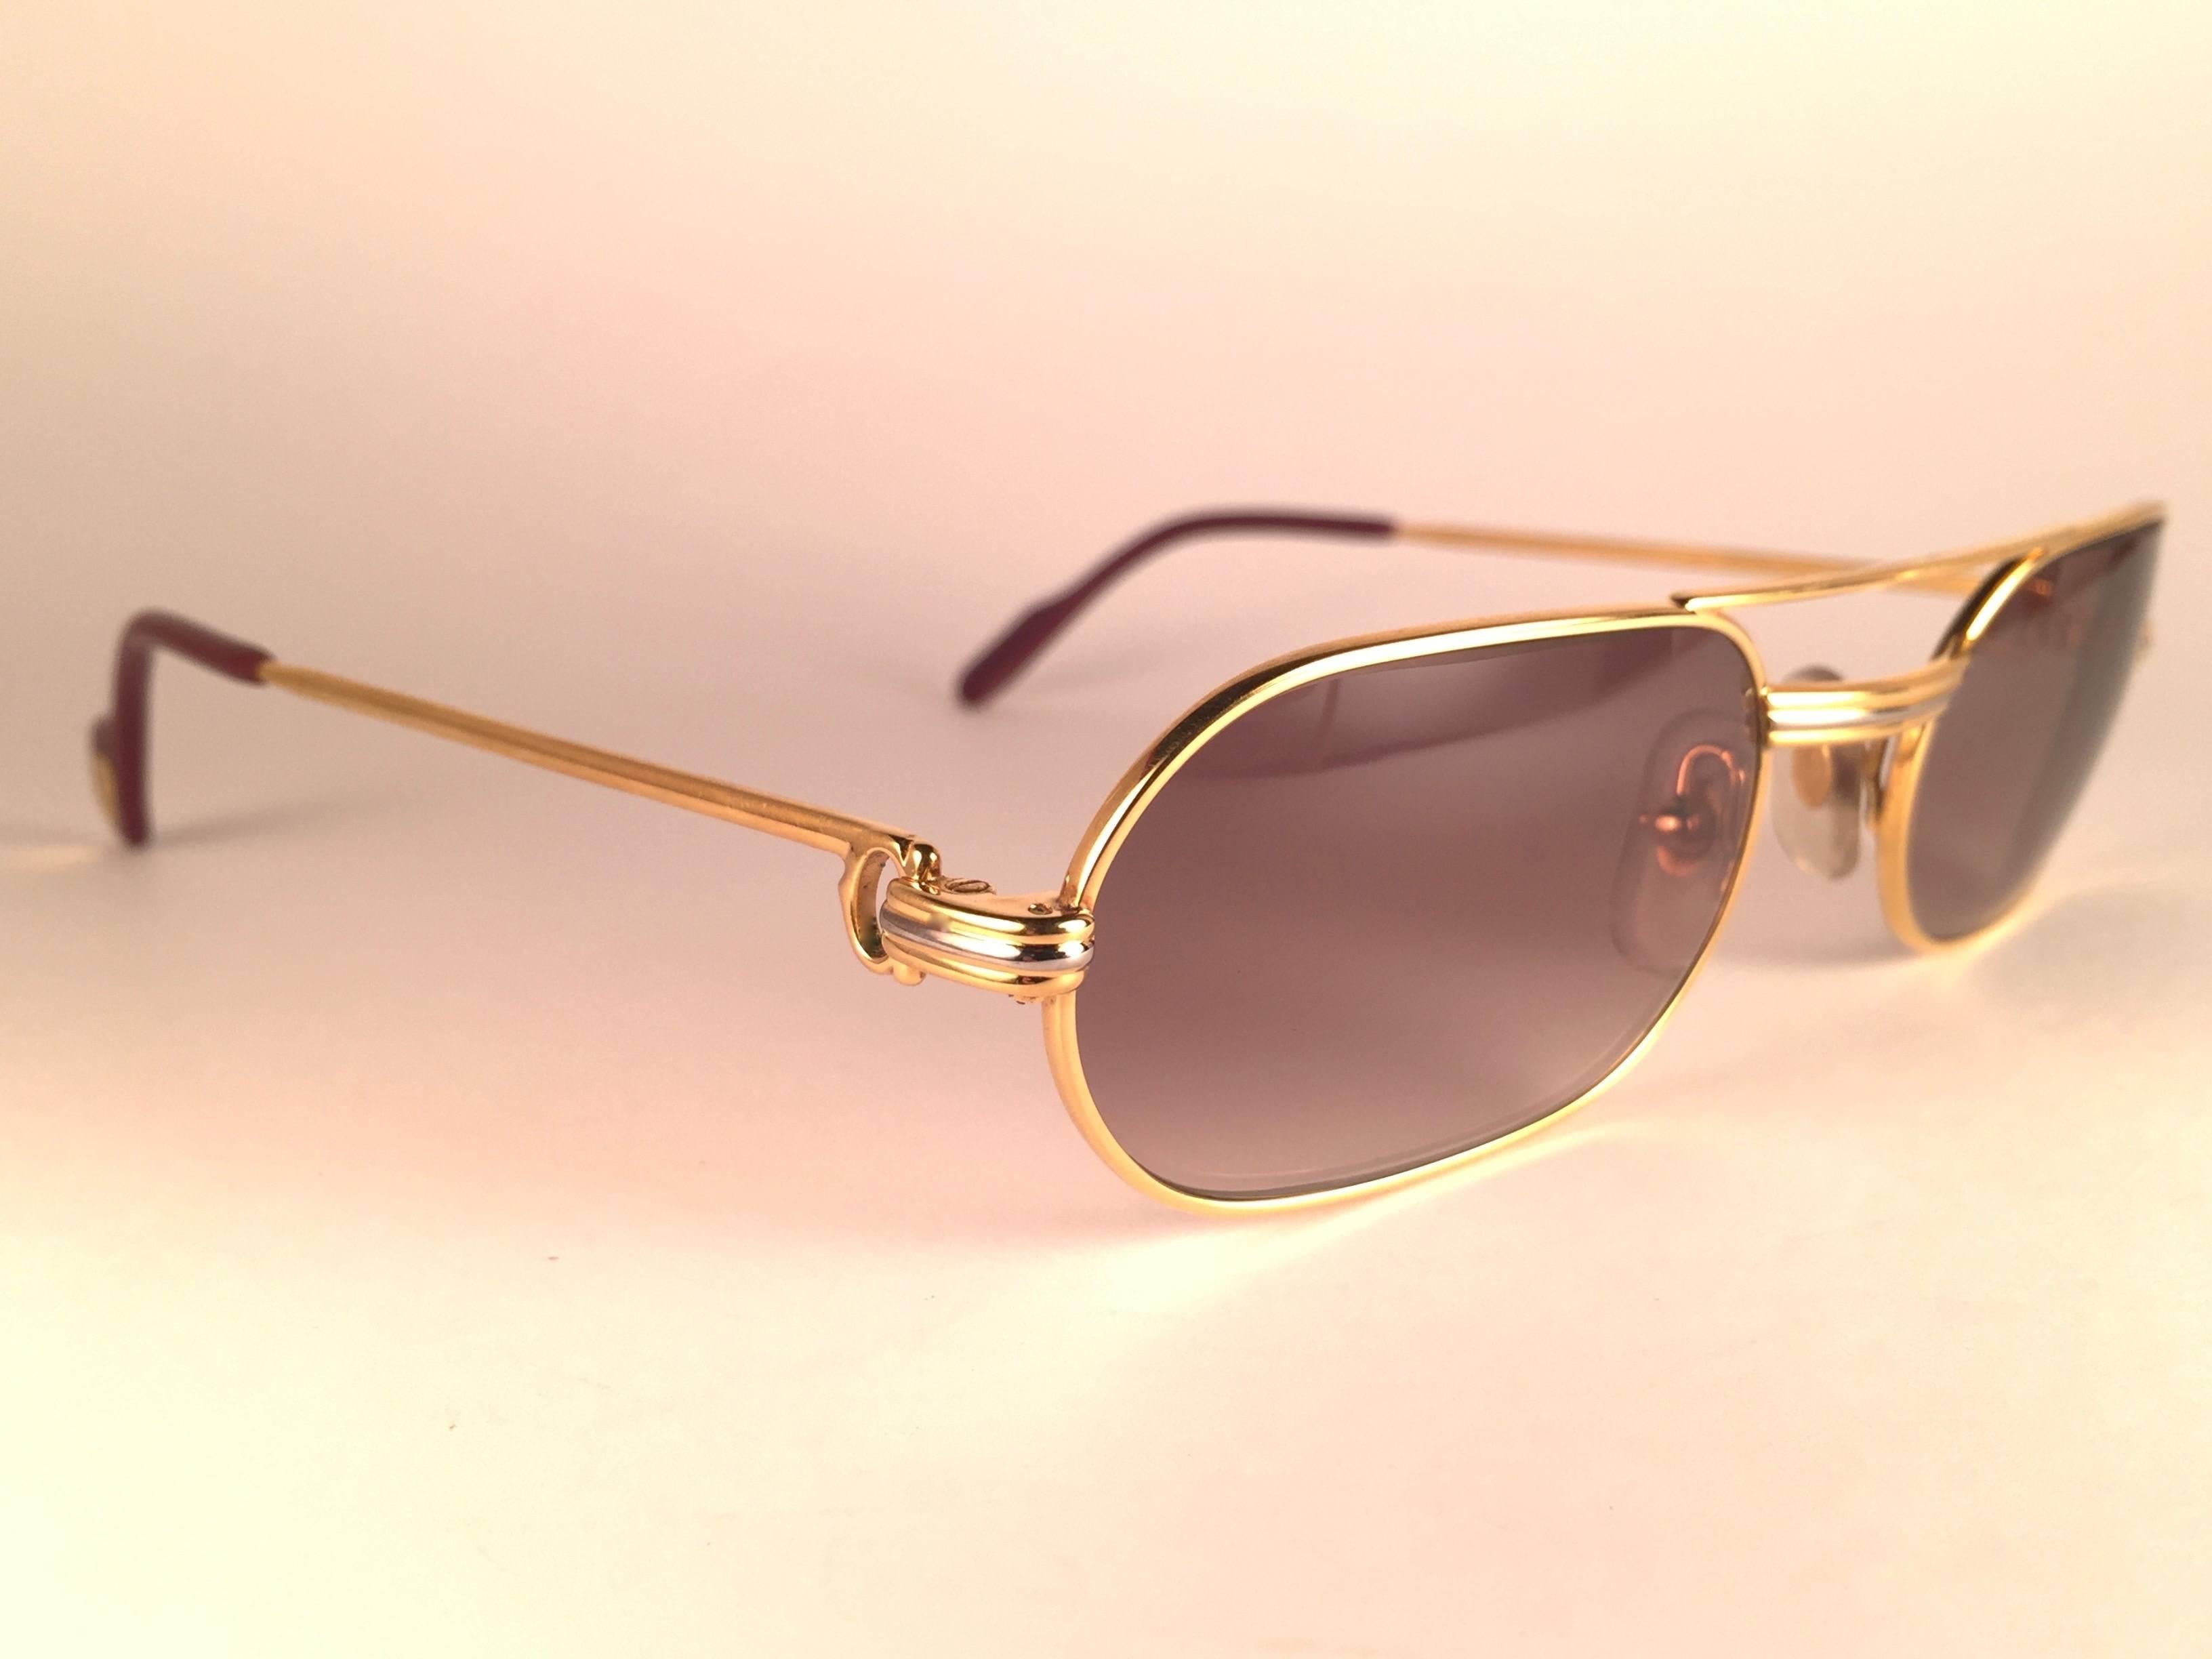 New Vintage Cartier Louis Vendome Medium 53mm France Sunglasses  In New Condition For Sale In Baleares, Baleares